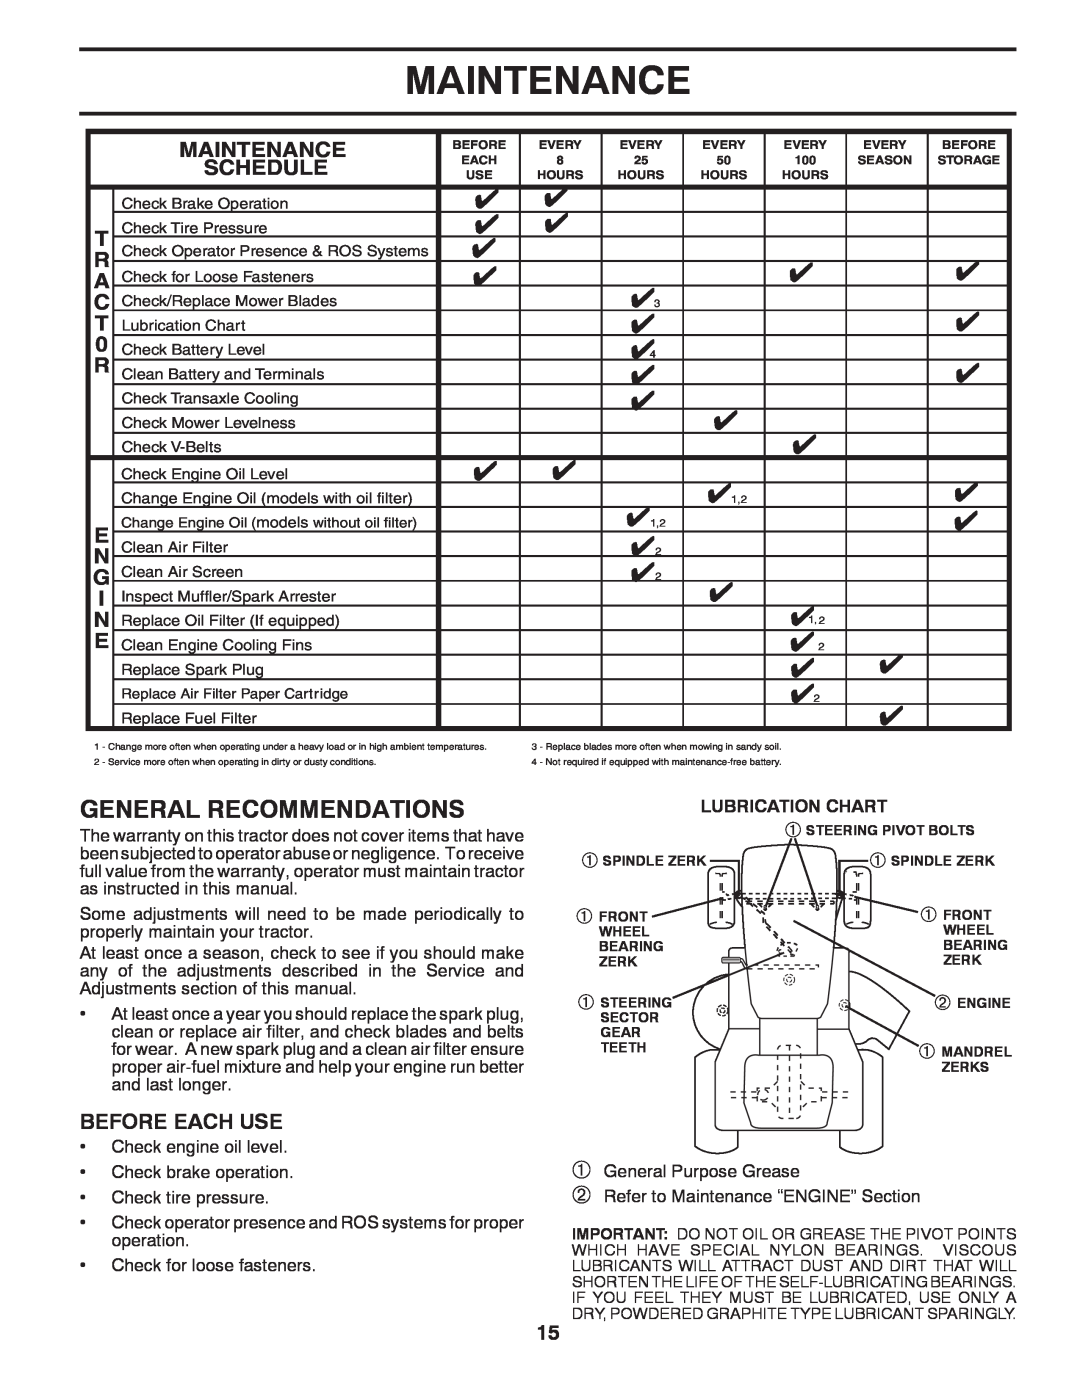 Husqvarna YTH2648TDRF owner manual Maintenance, General Recommendations, Schedule, Before Each Use 